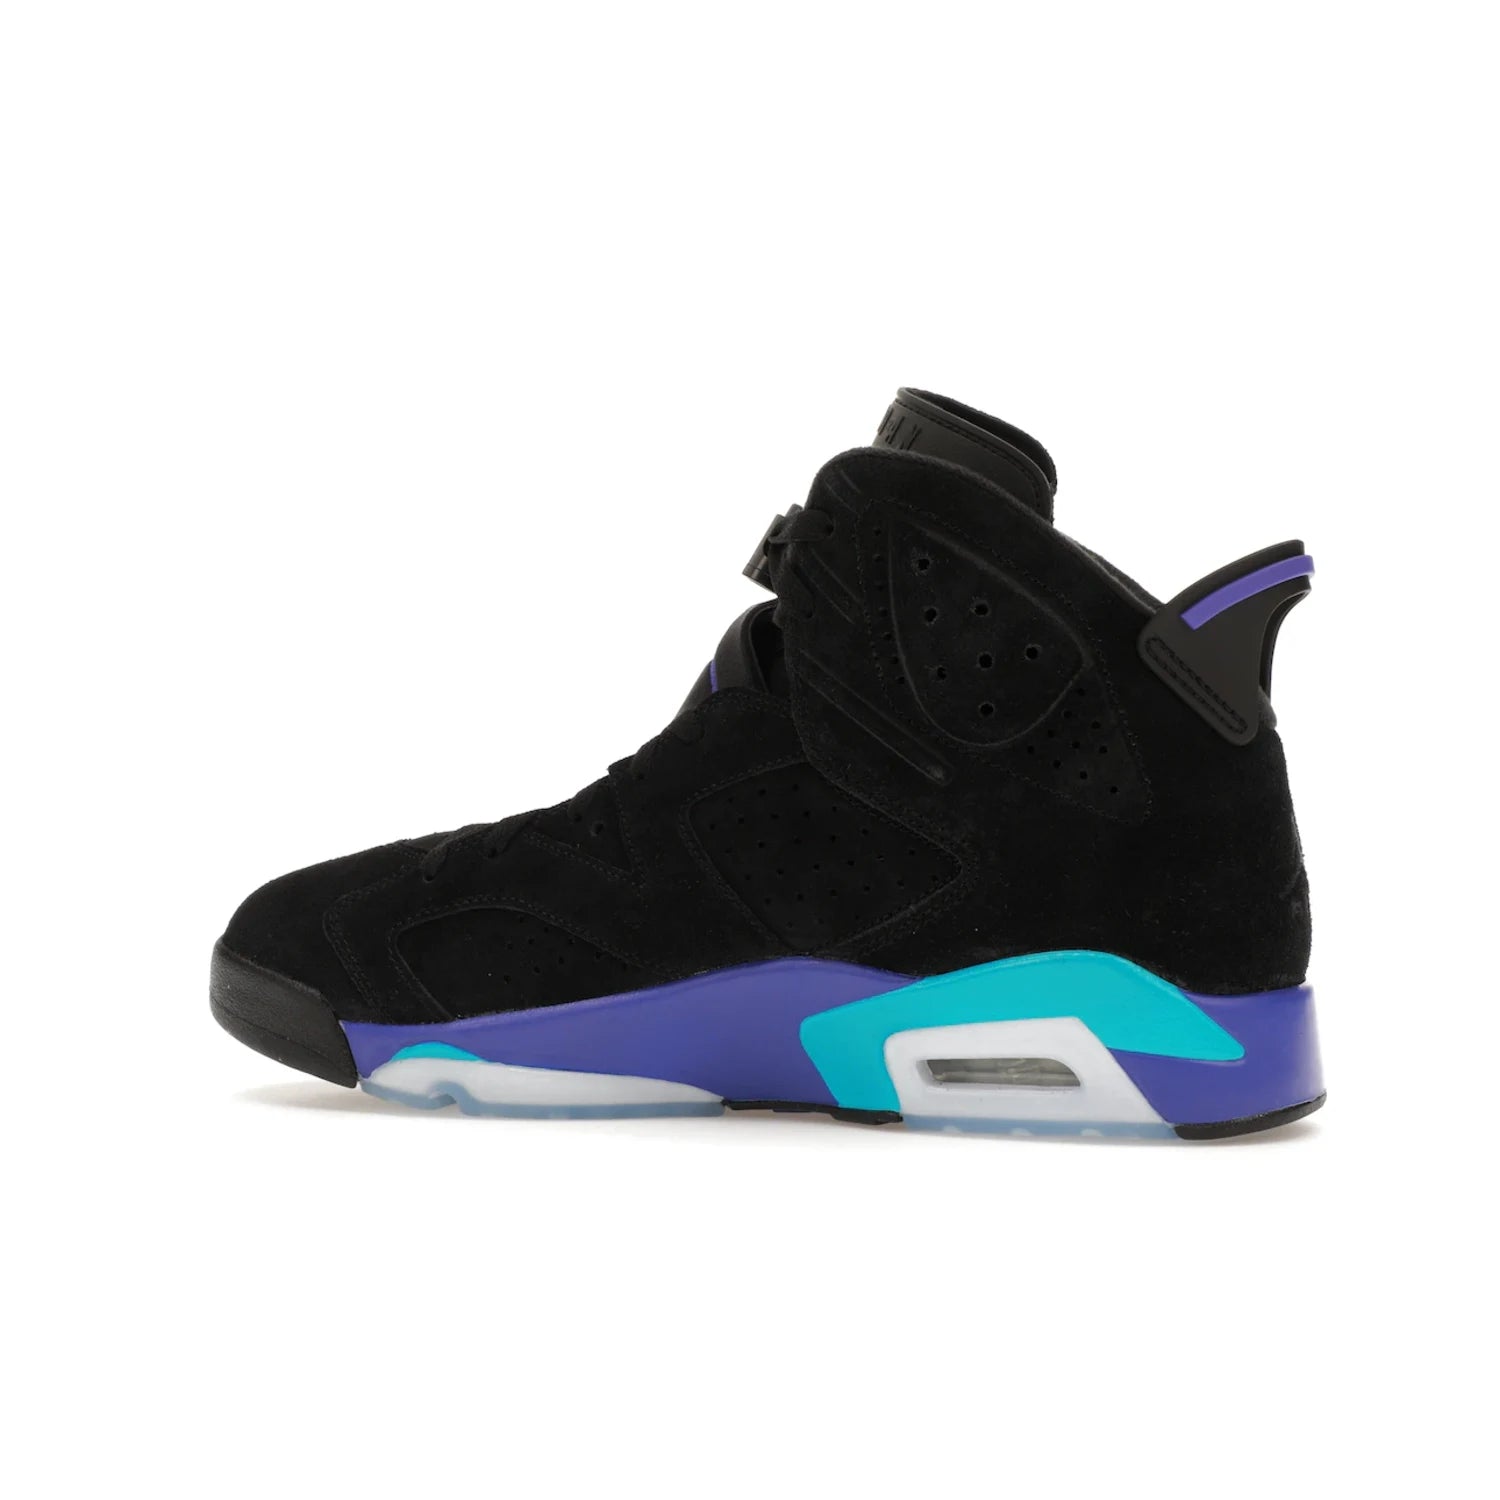 Jordan 6 Retro Aqua - Image 21 - Only at www.BallersClubKickz.com - Feel the classic Jordan 6 Retro Aqua paired with modern style. Black, Bright Concord, and Aquatone hues are crafted with a supple suede and rubberized heel tab. This standout sneaker adds signature Jordan elements at $200. Elevate your style with the Jordan 6 Retro Aqua.